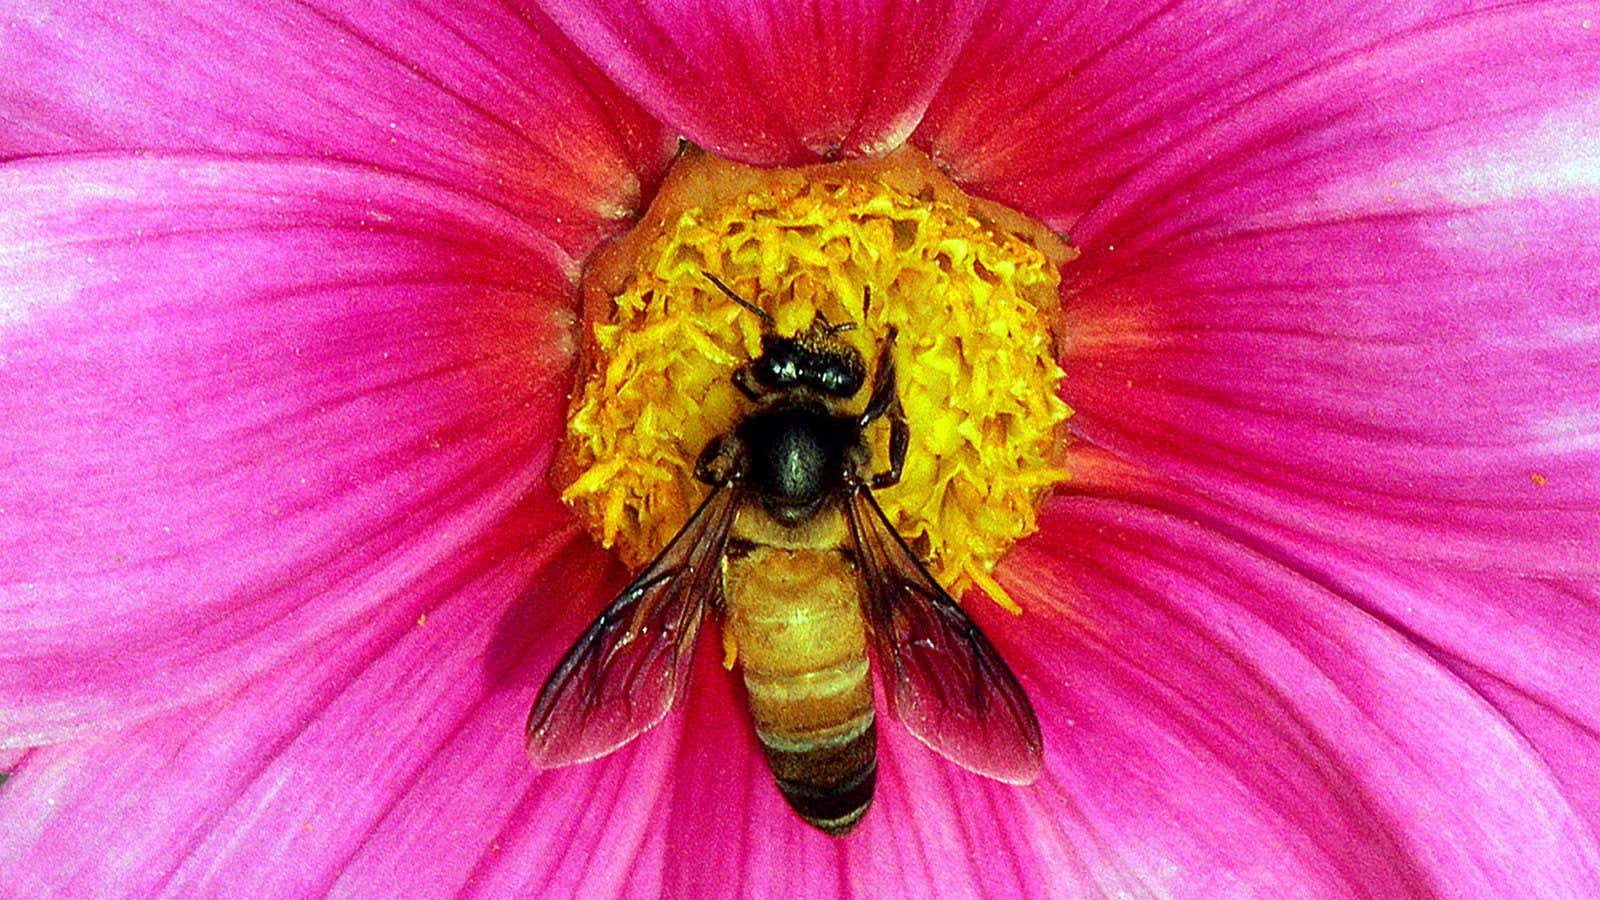 Pesticides are believed to be a key threat to bee colonies in India.